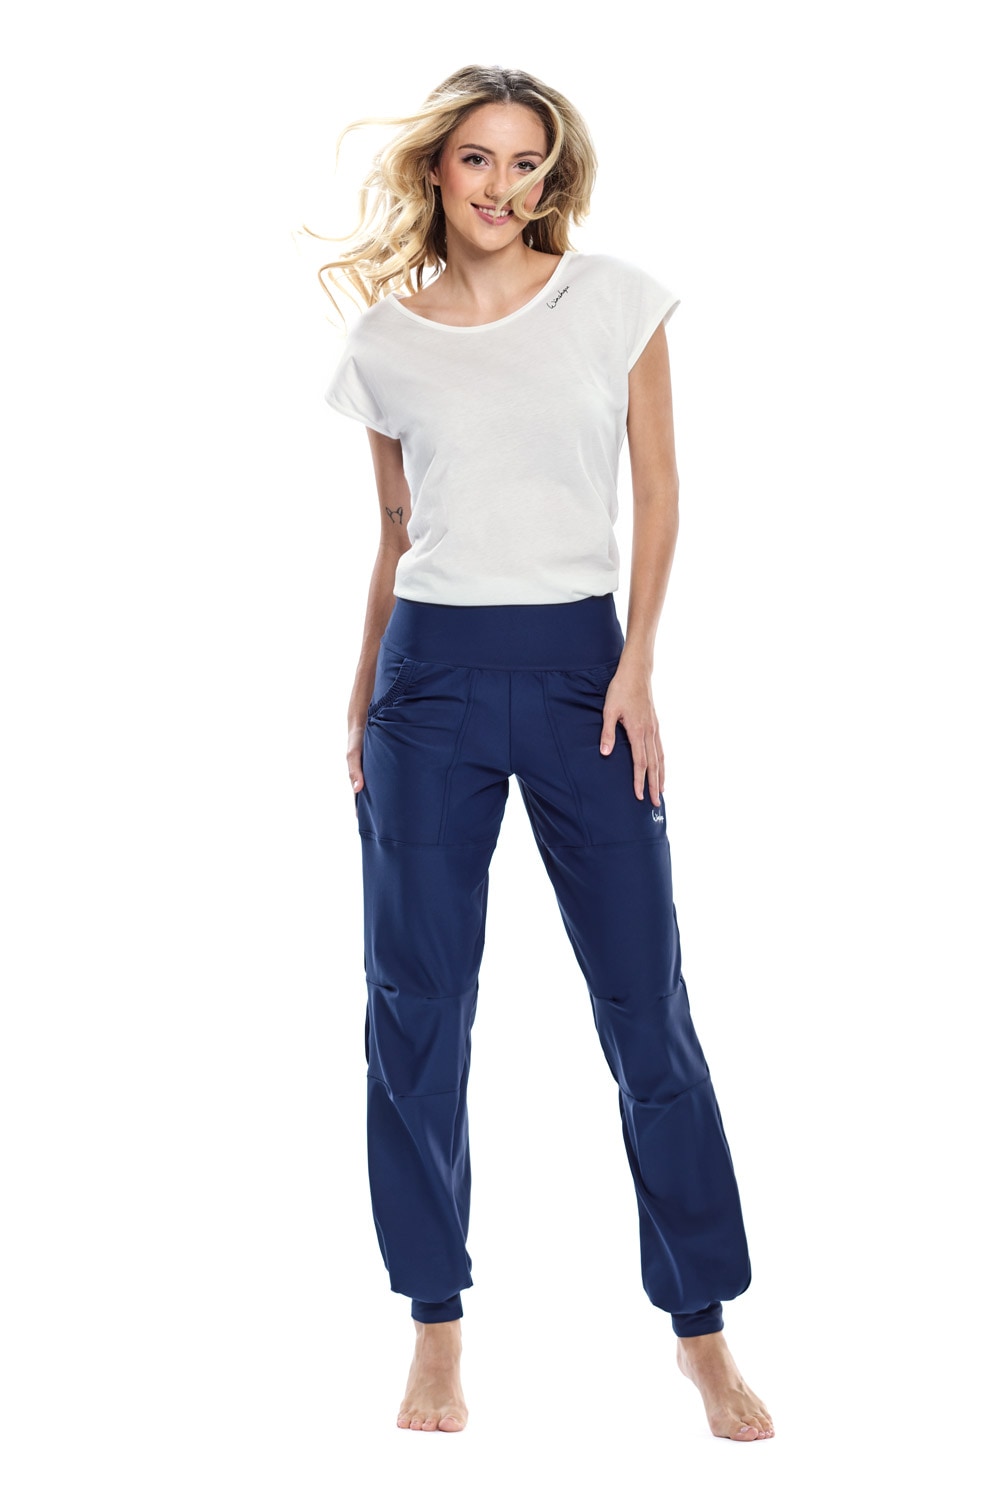 LEI101C«, Trousers OTTO Time Leisure bei Sporthose Comfort »Functional online Waist Winshape High